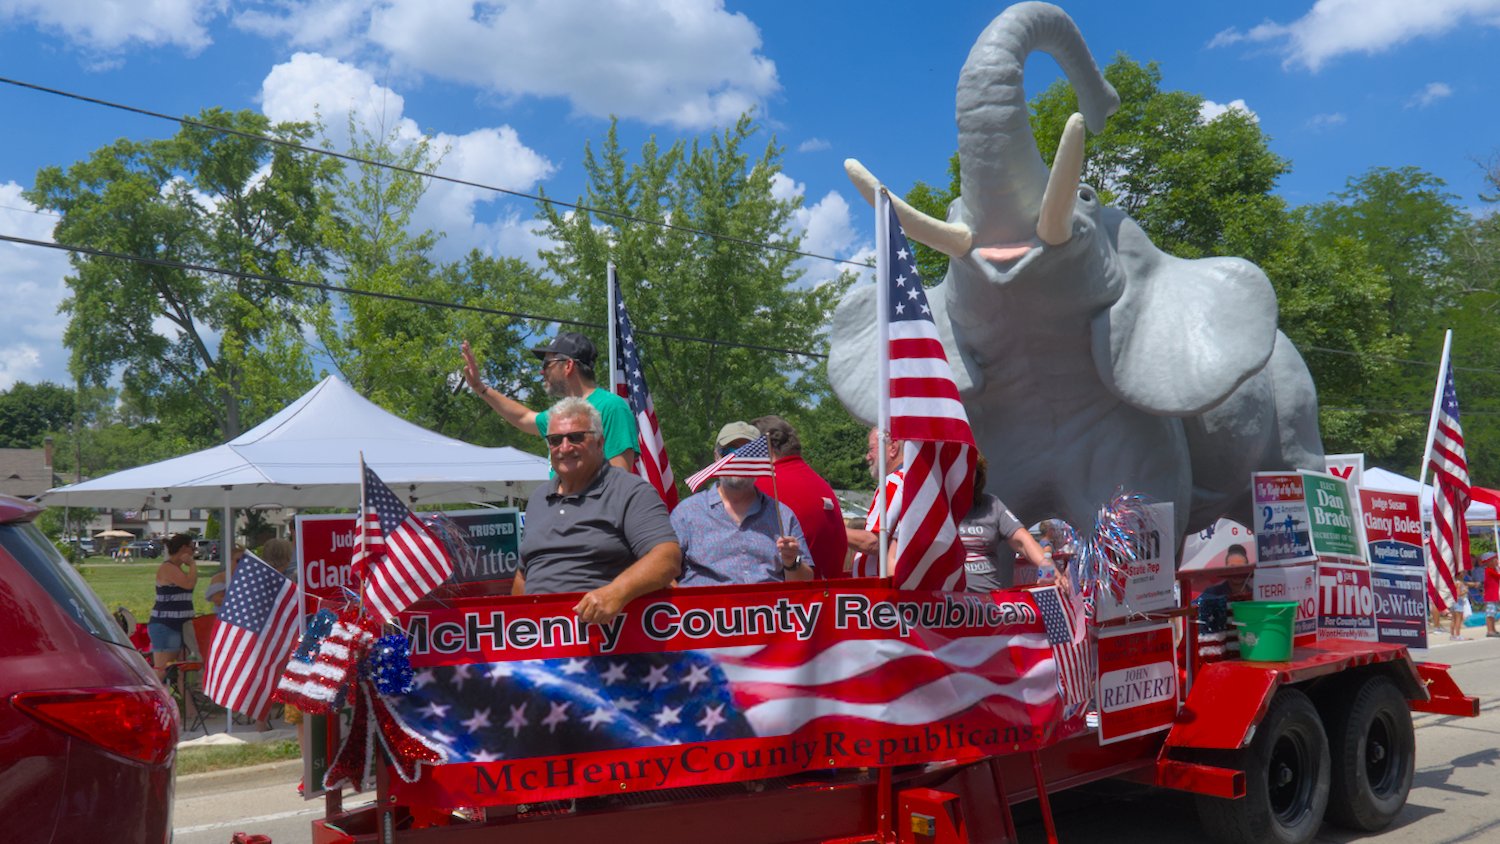 McHenry County Republican Party float.